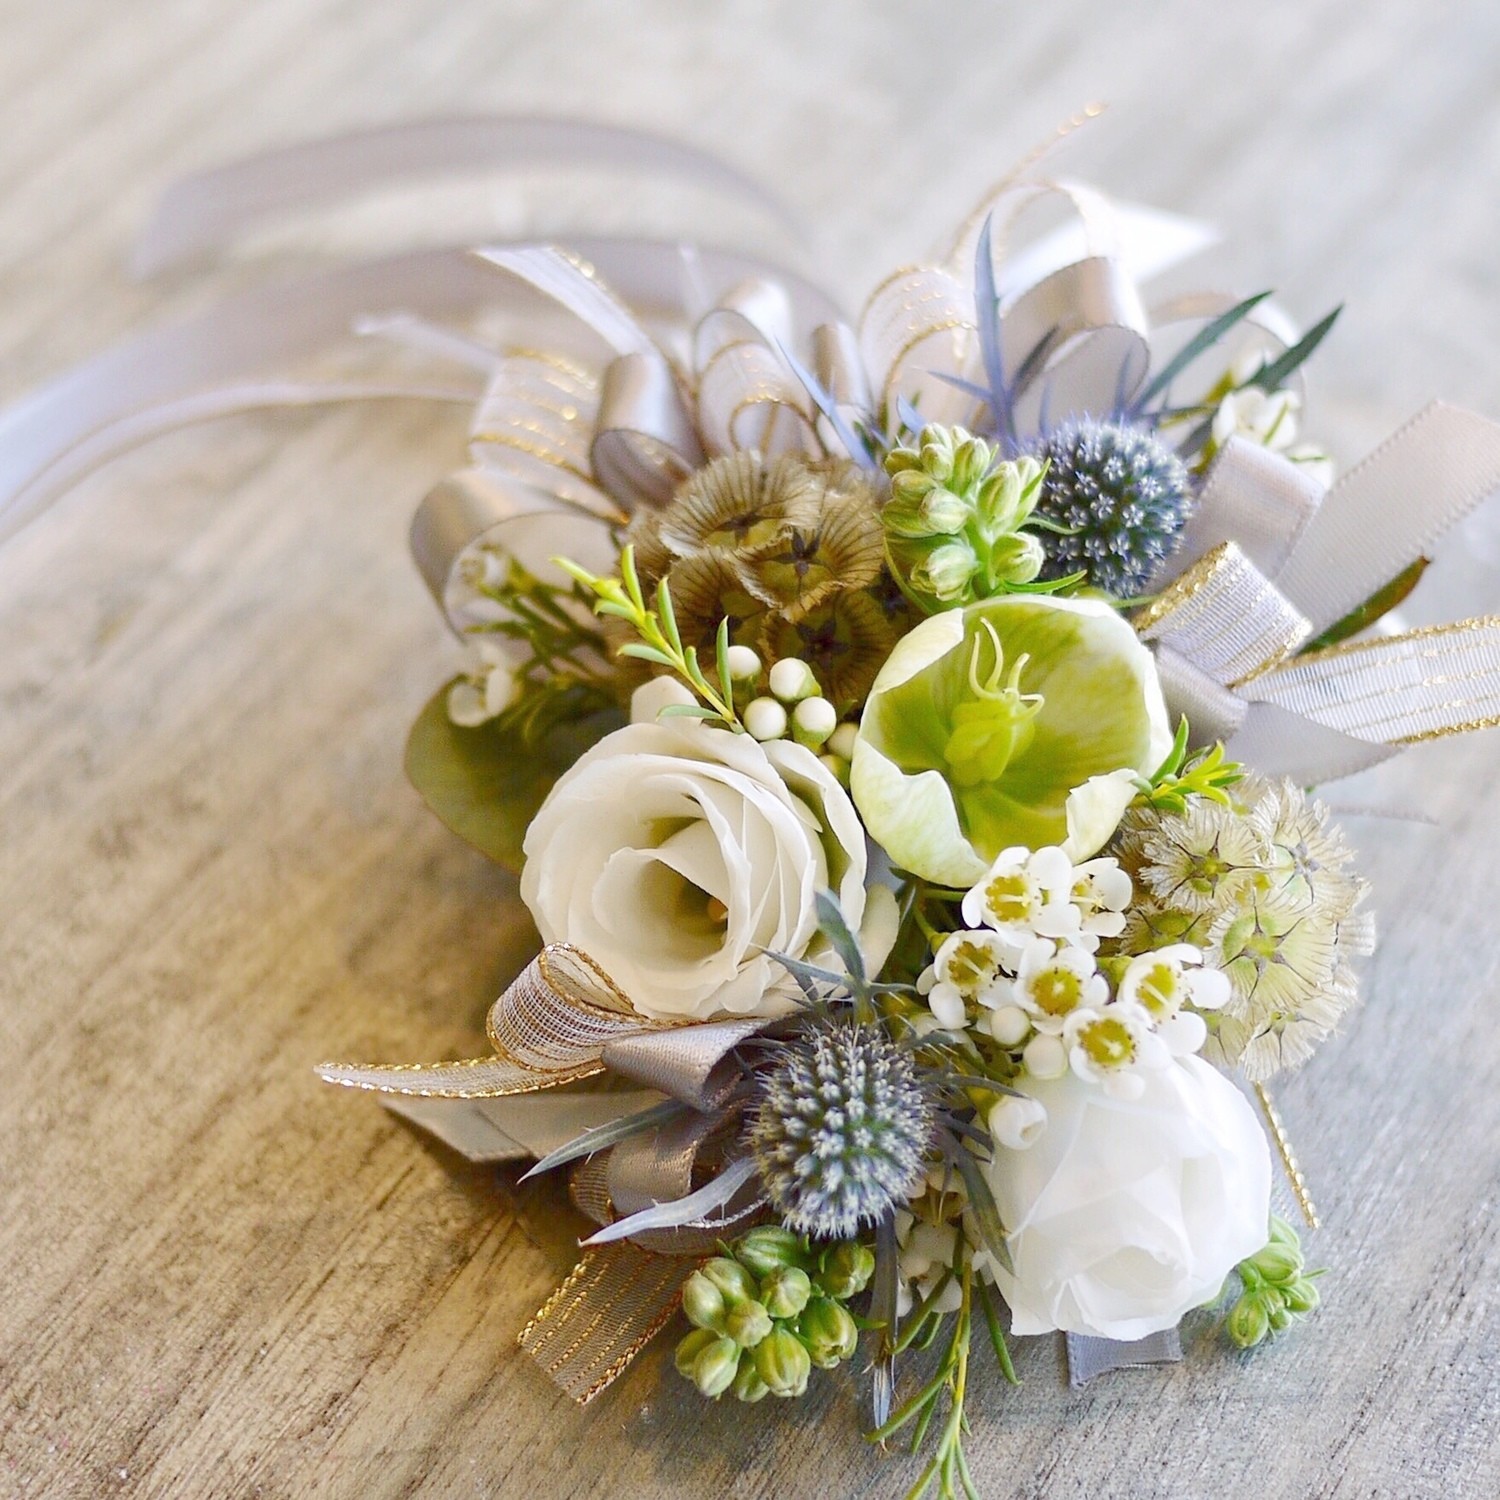 Set of Rustic boutonniere + Corsage